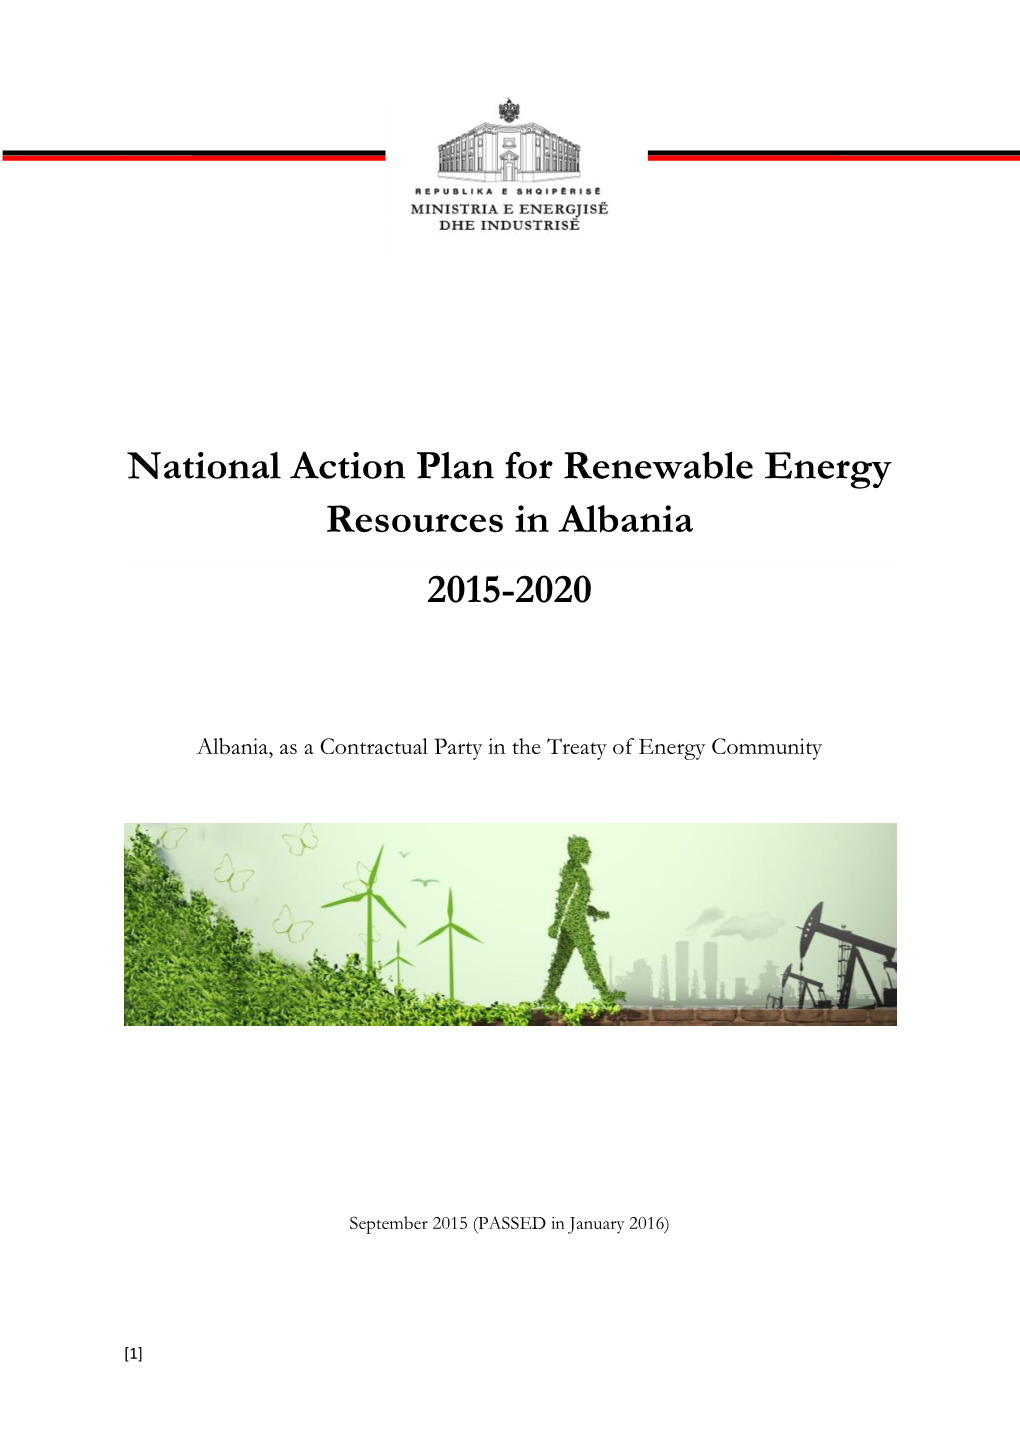 National Action Plan for Renewable Energy Resources in Albania 2015-2020